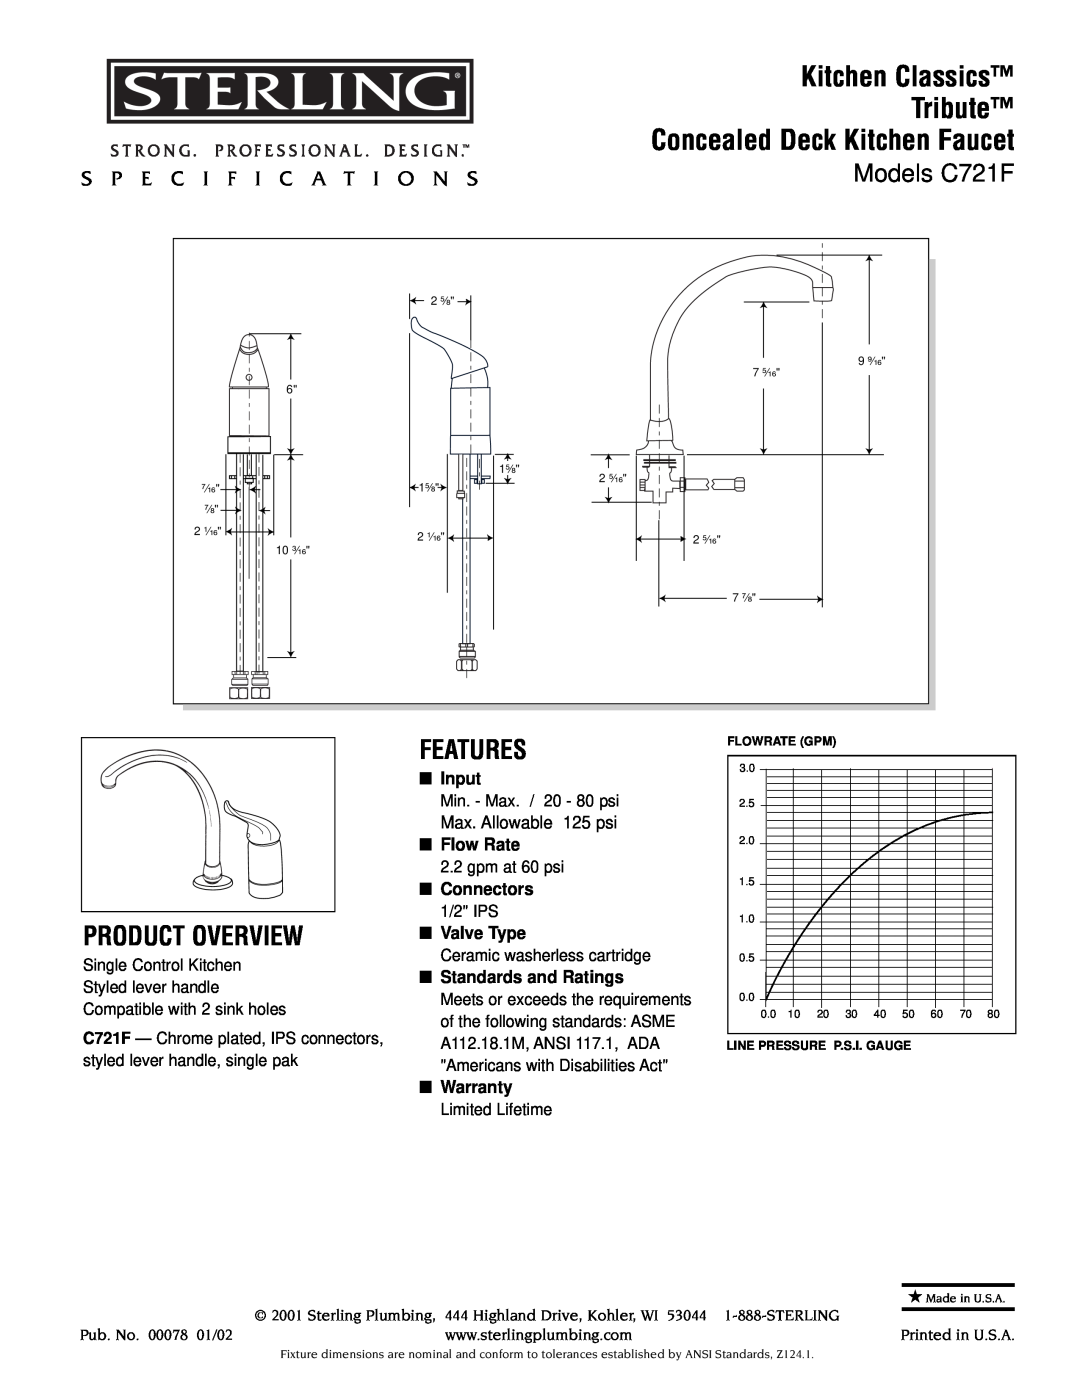 Sterling Plumbing C721F specifications Kitchen Classics Tribute, Concealed Deck Kitchen Faucet, Product Overview, Features 